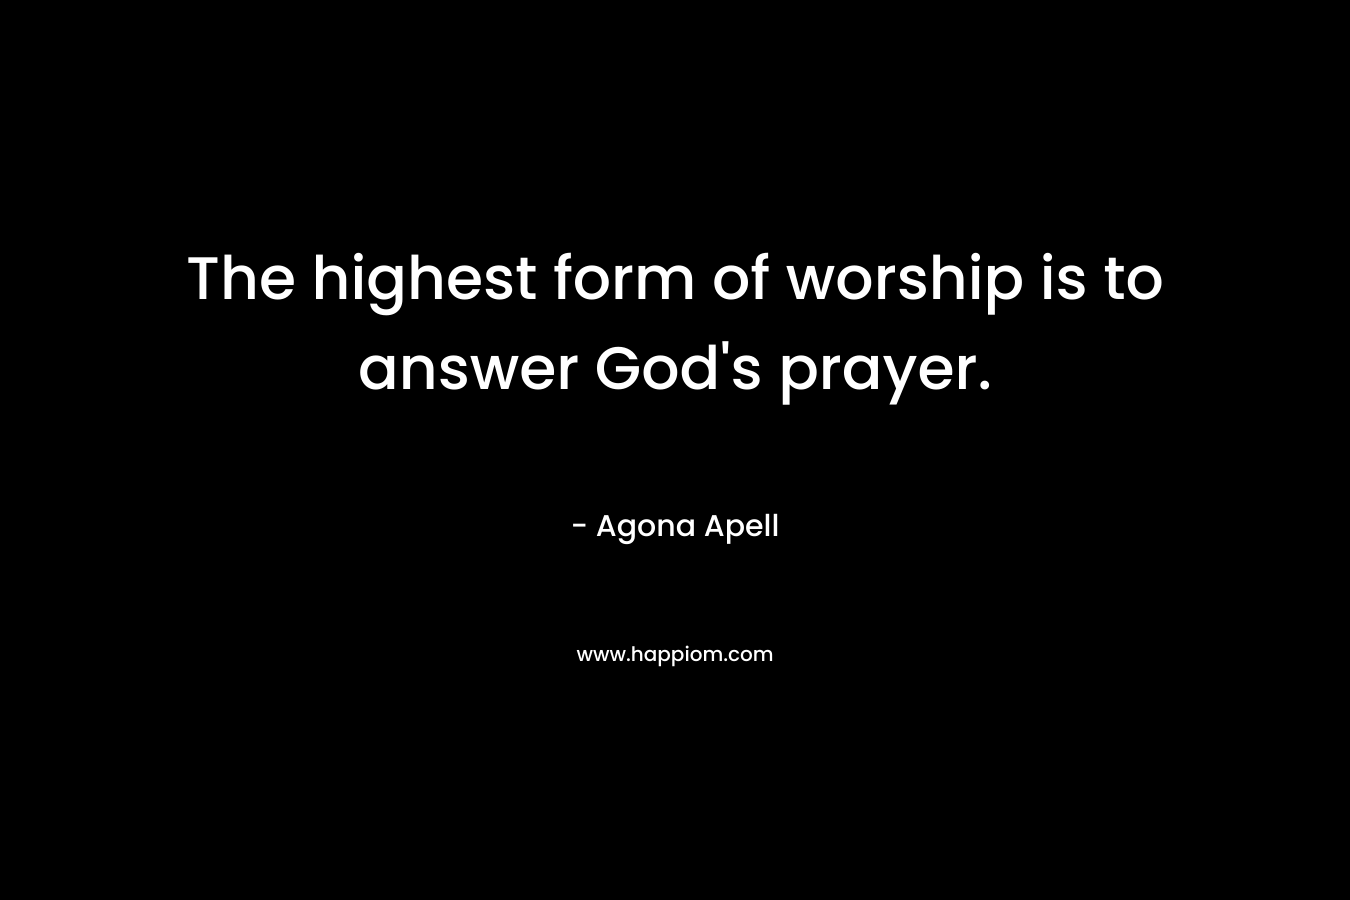 The highest form of worship is to answer God's prayer.